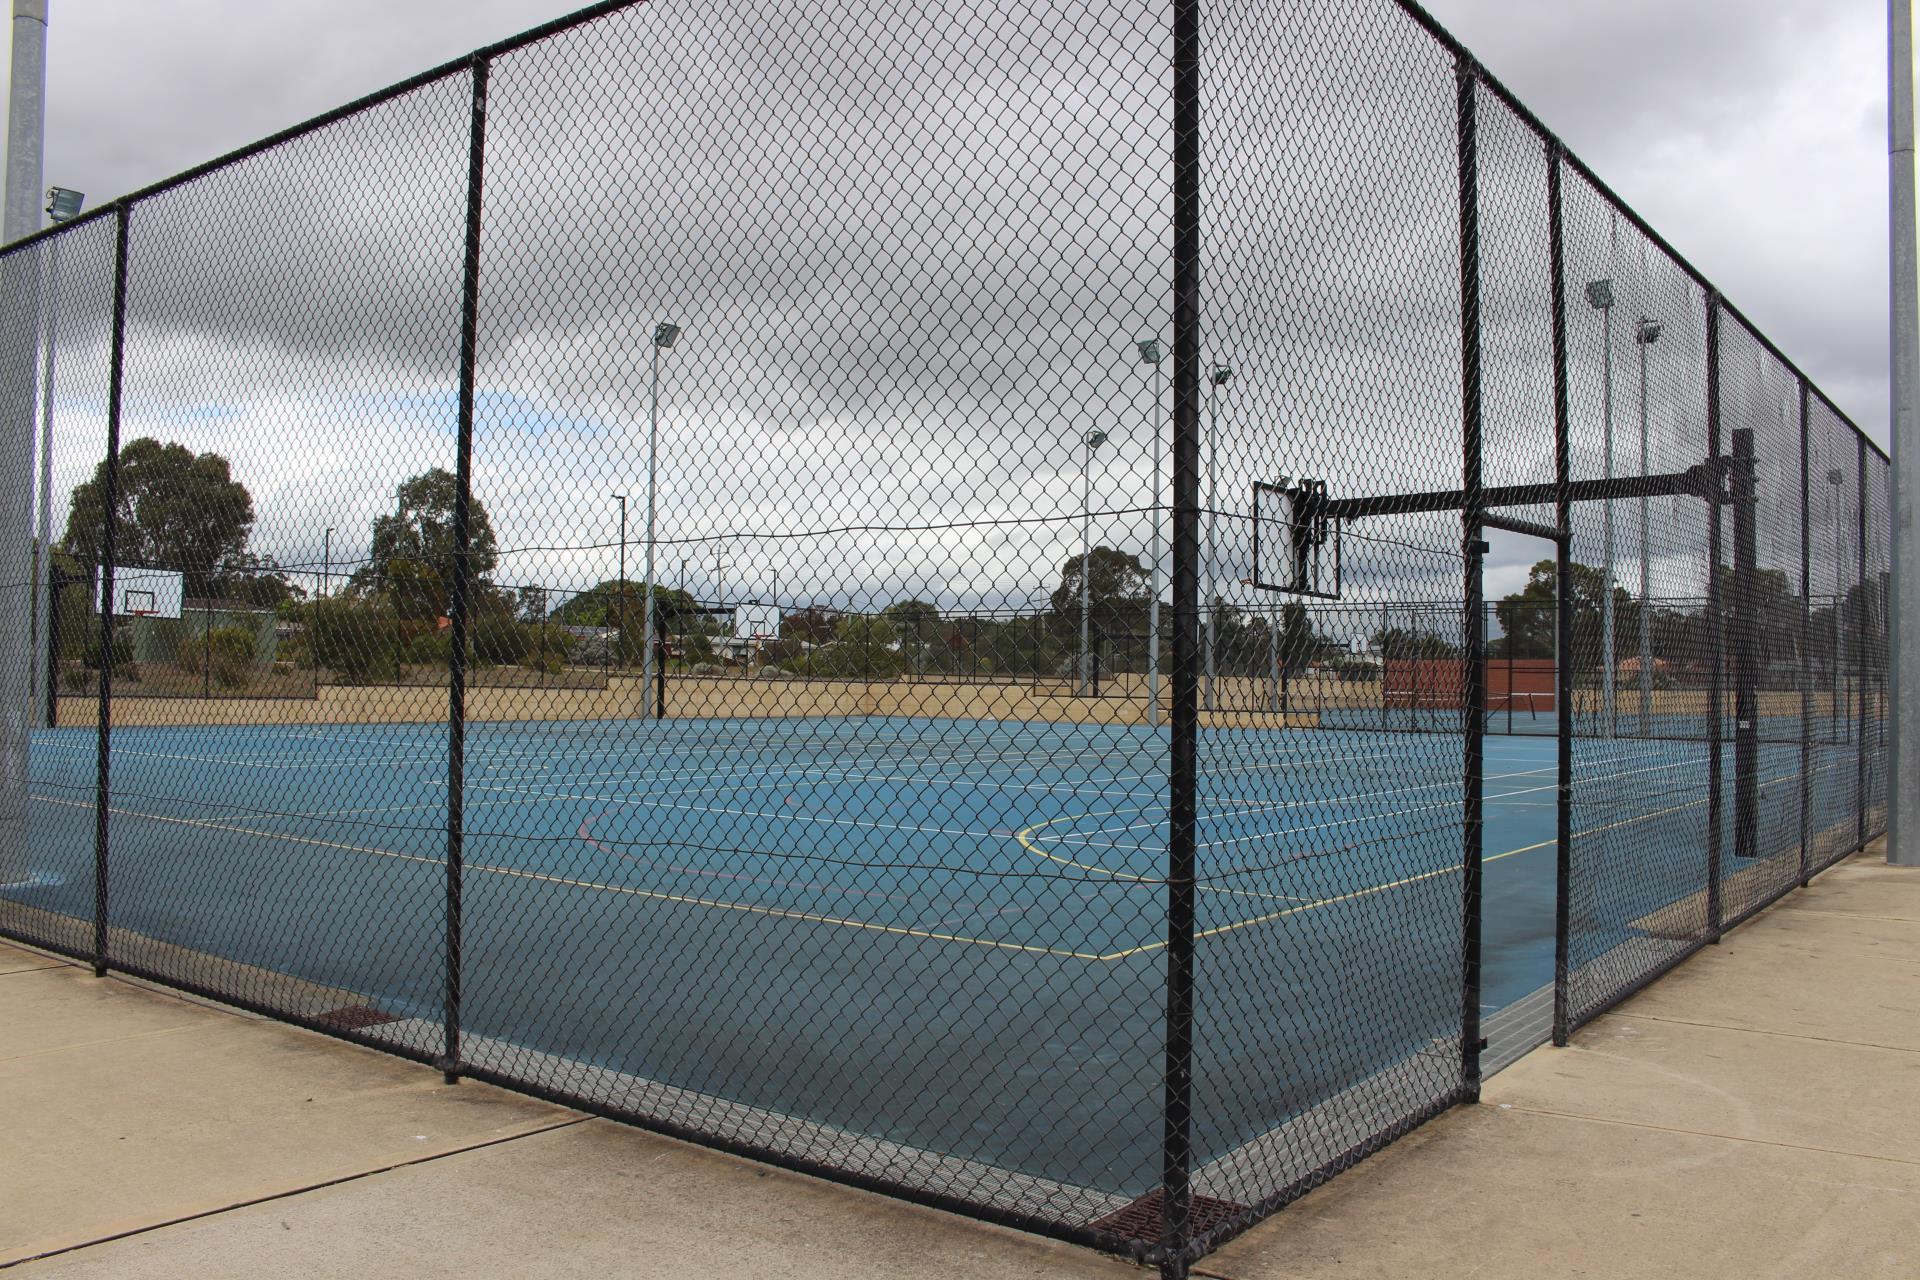 Tennis courts at Capel Recreation Gorunds